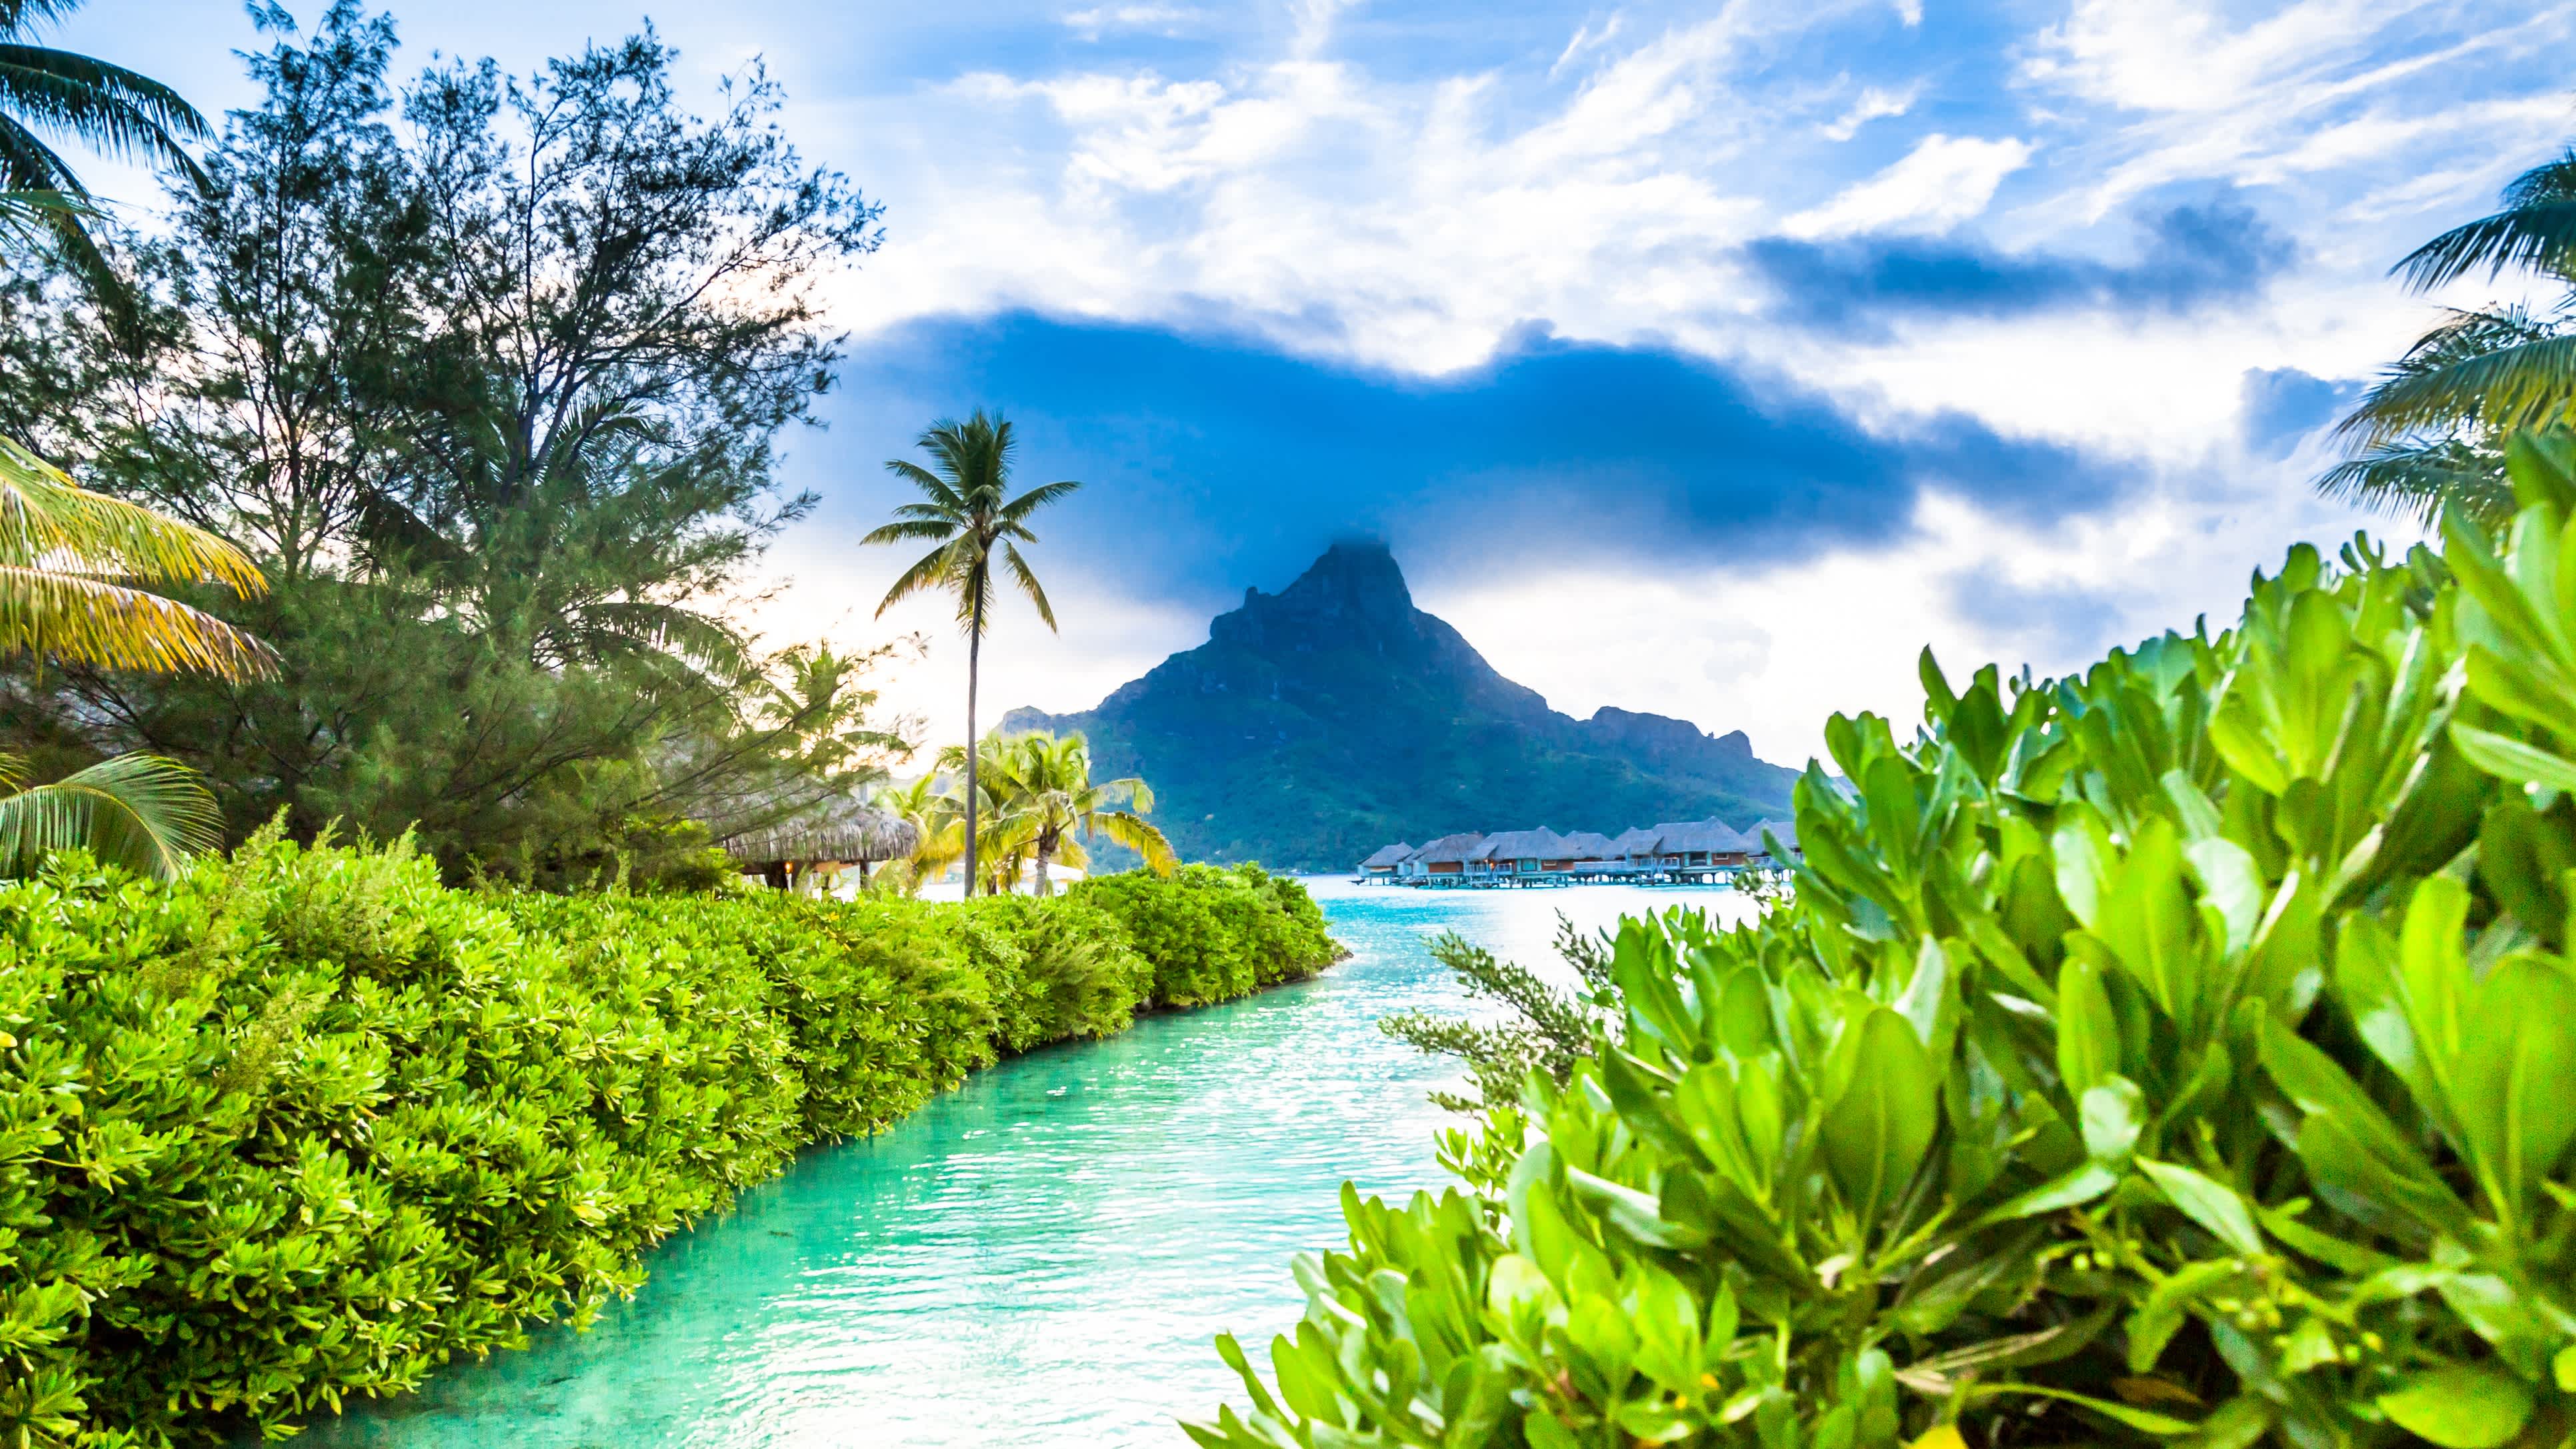 Go on a French Polynesia vacation to see turquoise waters surrounded by greenery, giving way to the ocean and a mountain looms in the background.